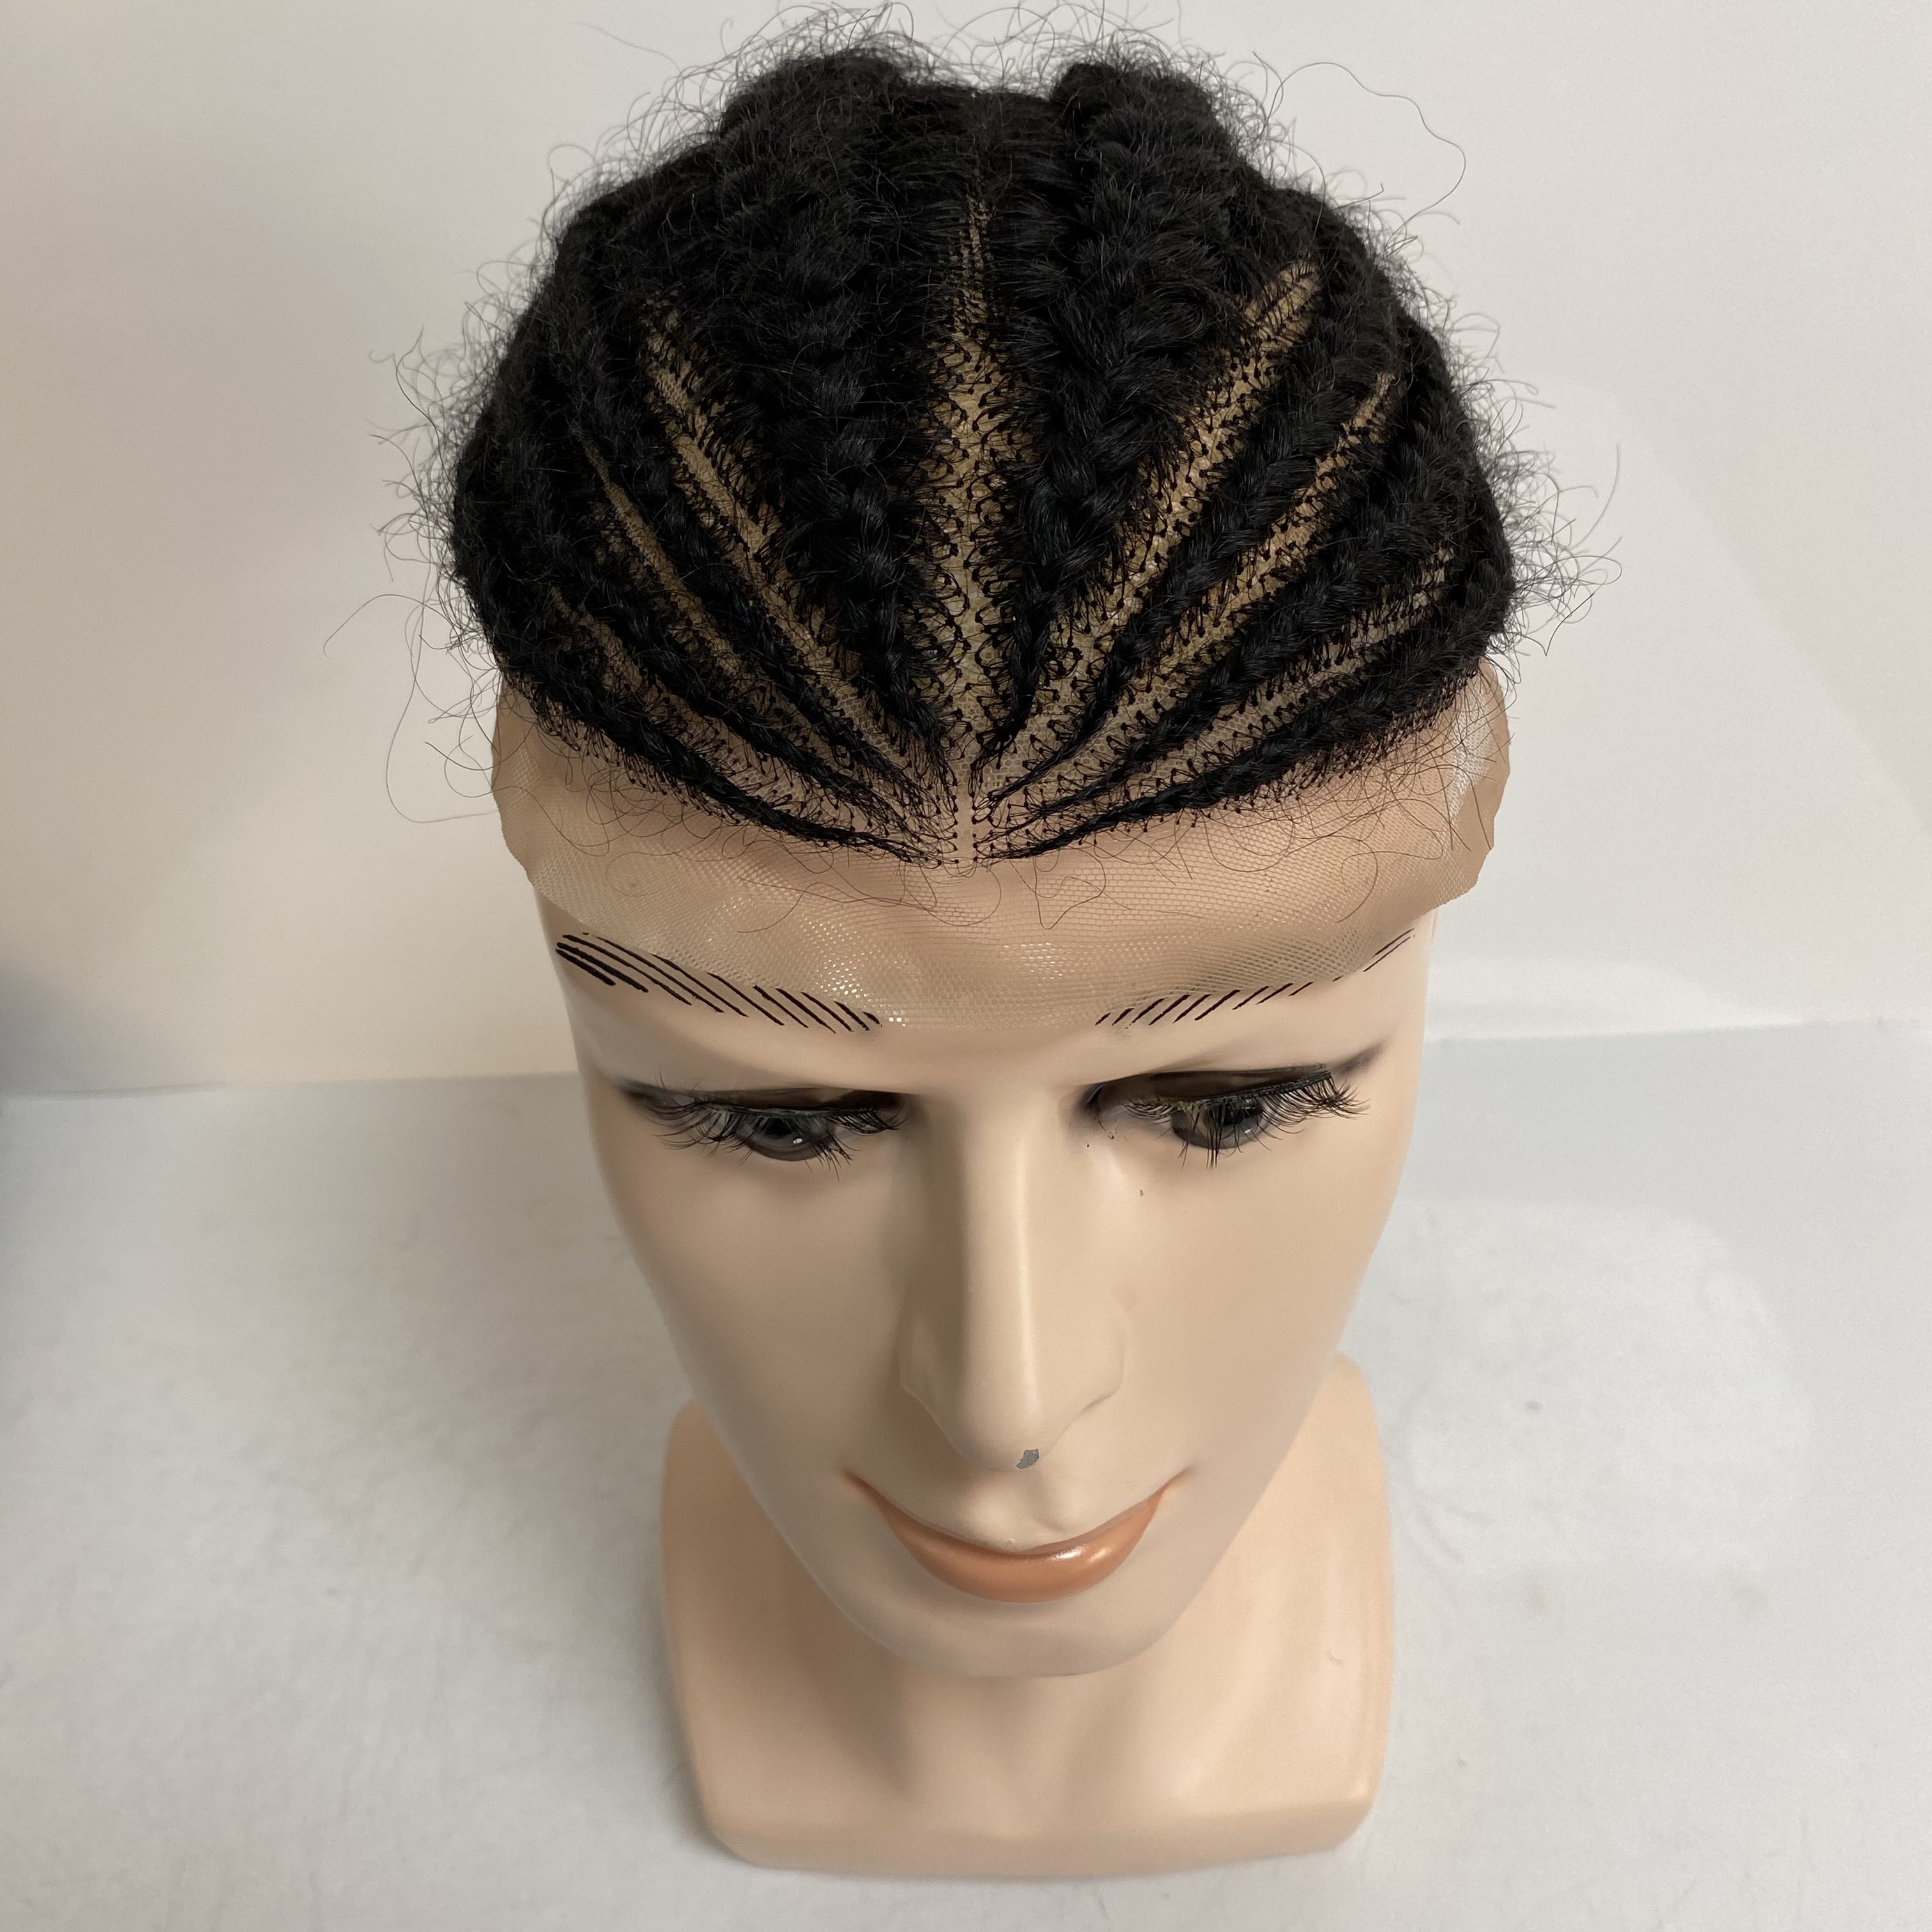 Wear To Go Full Lace Hair Systems With African Twist Braided Hairstyles For Men Replacement Braids Toupee Hair For Balding Crown Wholesale 